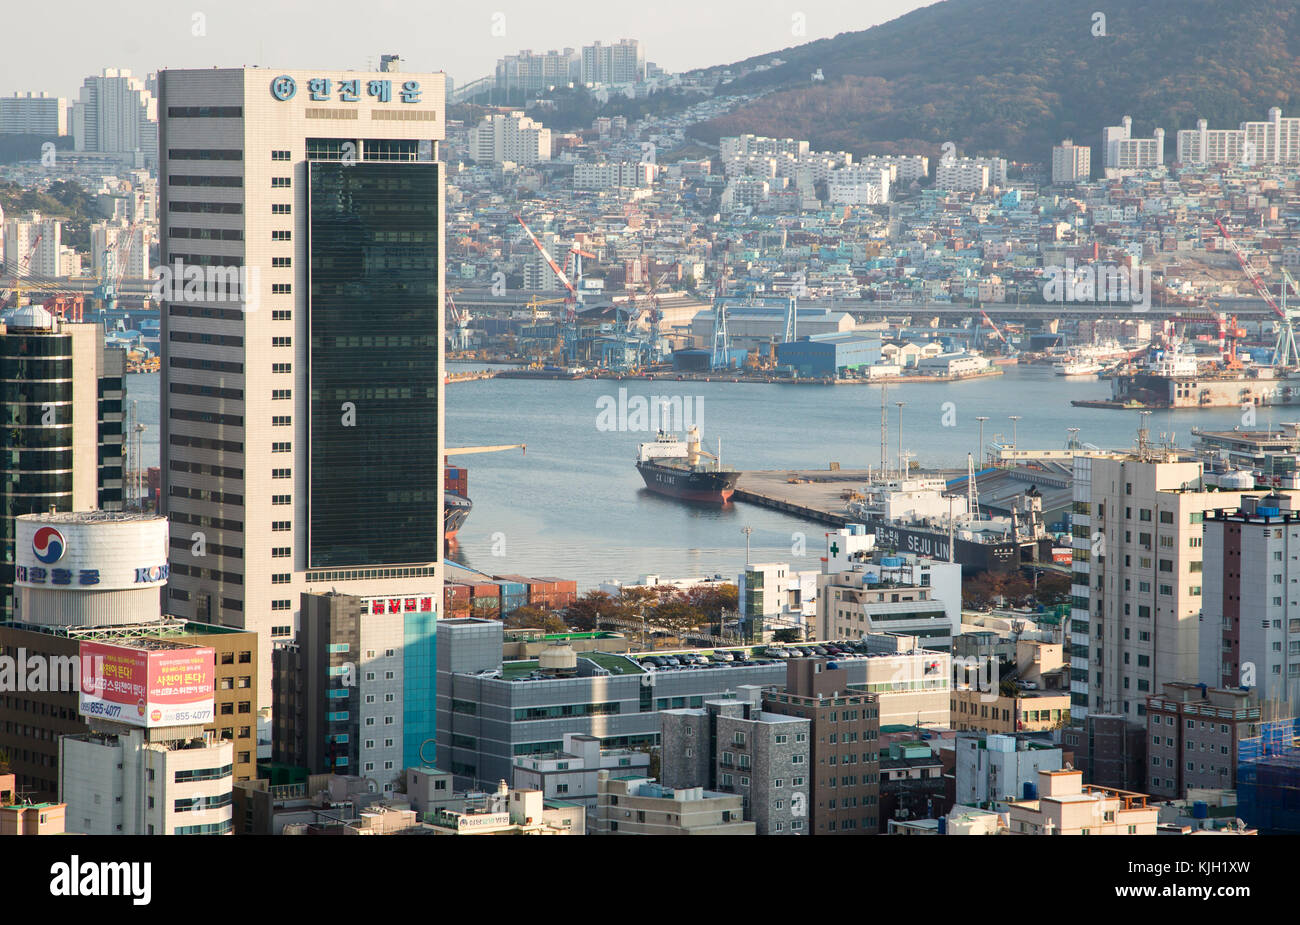 Yeongju village and Busan Port, Nov 15, 2017 : Yeongju-dong village and Busan Port (Busan North Port) are seen in Busan, about 420 km (261 miles) southeast of Seoul, South Korea. During the 1950-53 Korean War, Busan became the home of millions of refugees who fled to the temporary capital of South Korea. The refugees gathered at hilly villages near Busan Station and Busan Port to make a living. Credit: Lee Jae-Won/AFLO/Alamy Live News Stock Photo